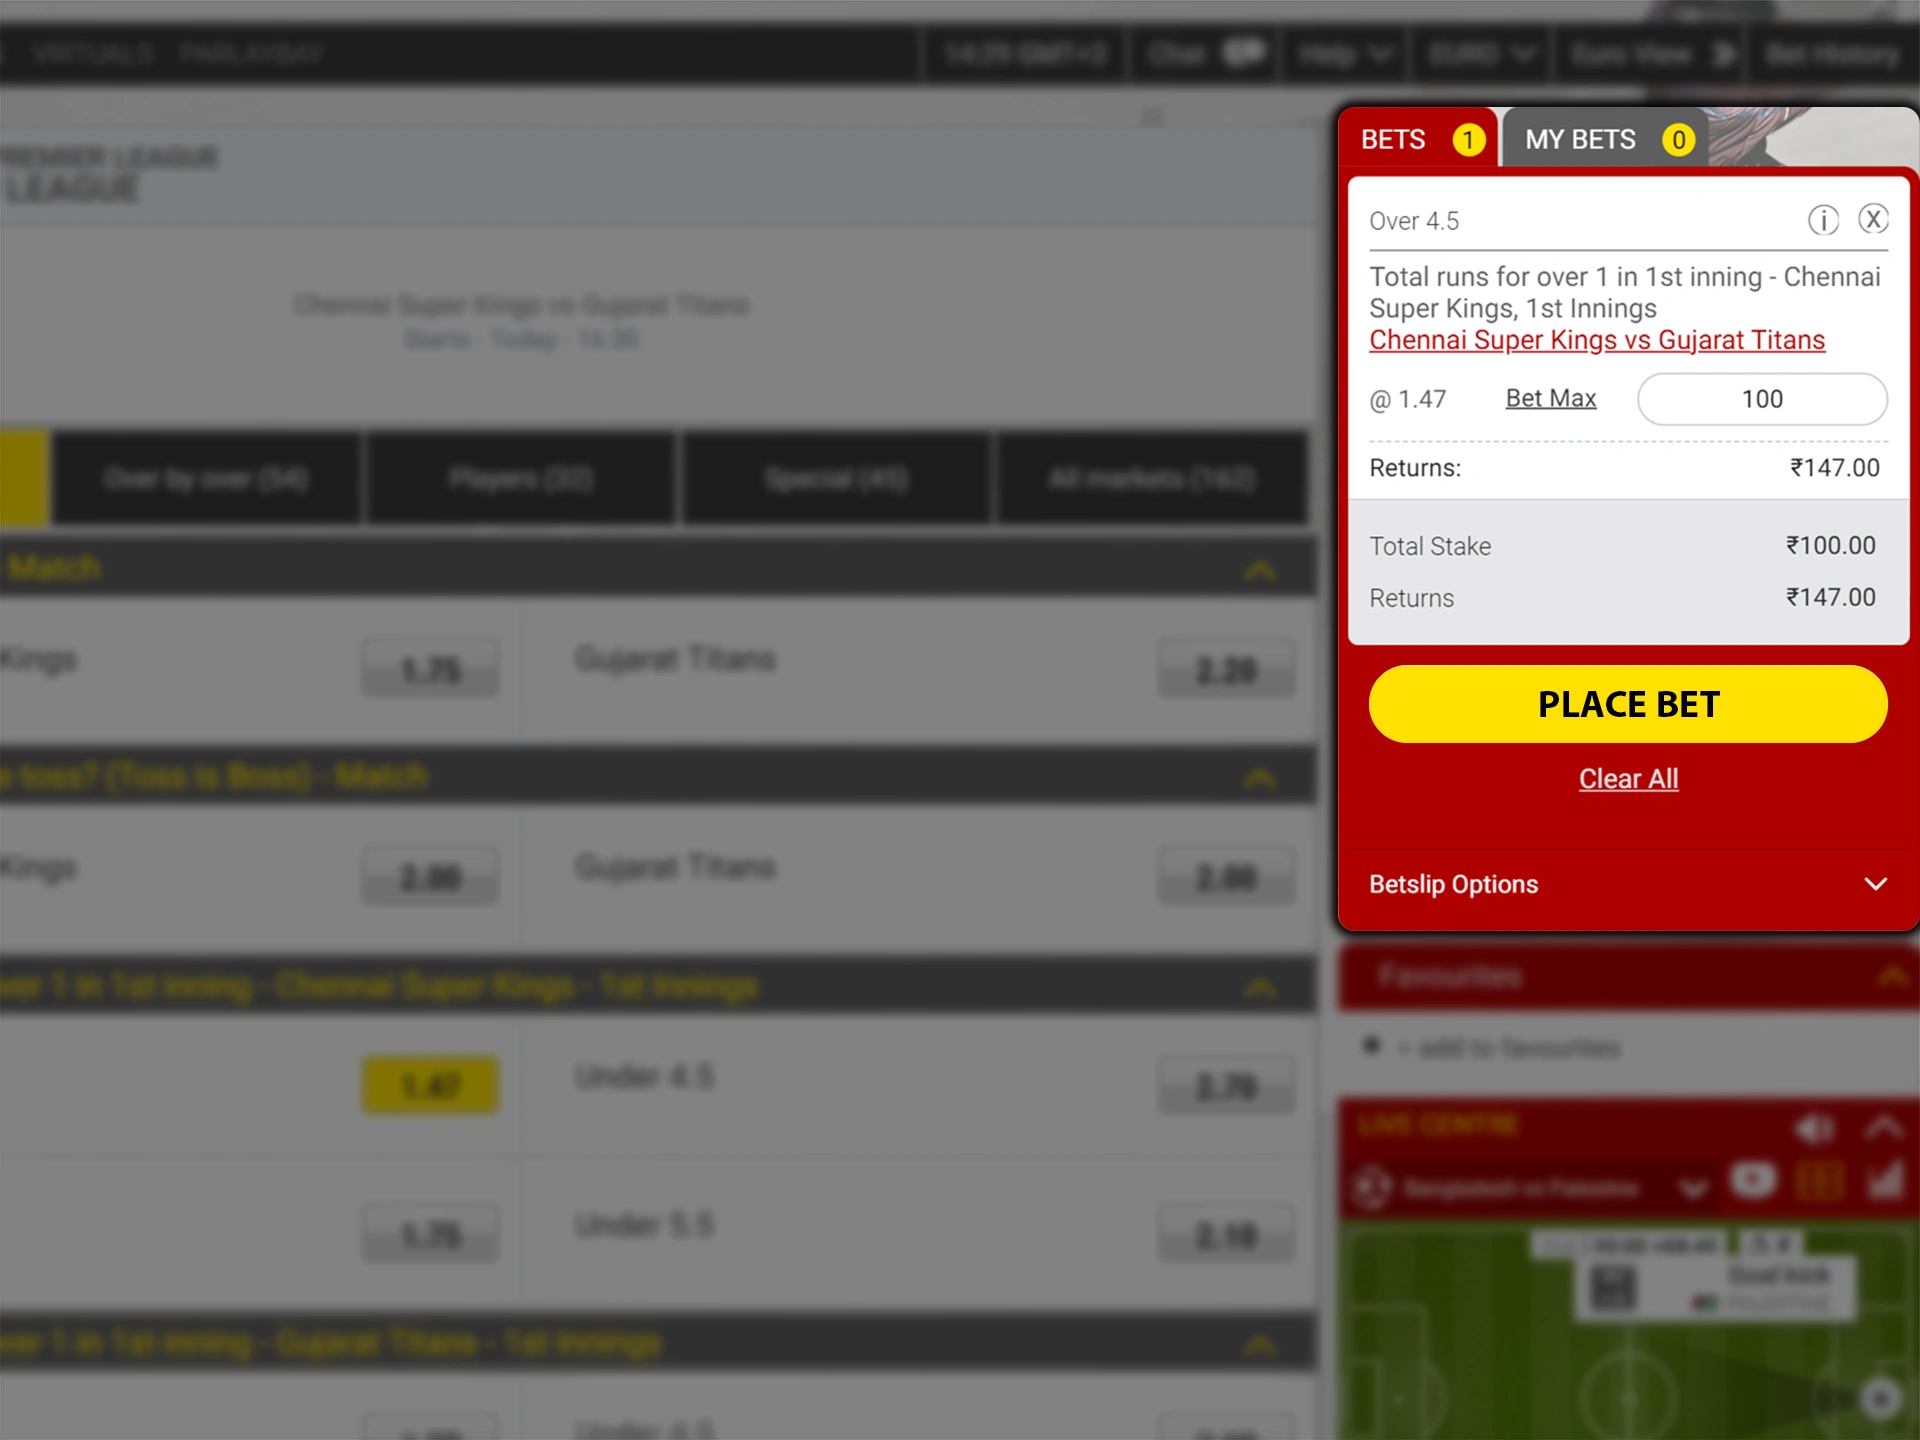 Enter all the necessary information and place your bet at Dafabet.